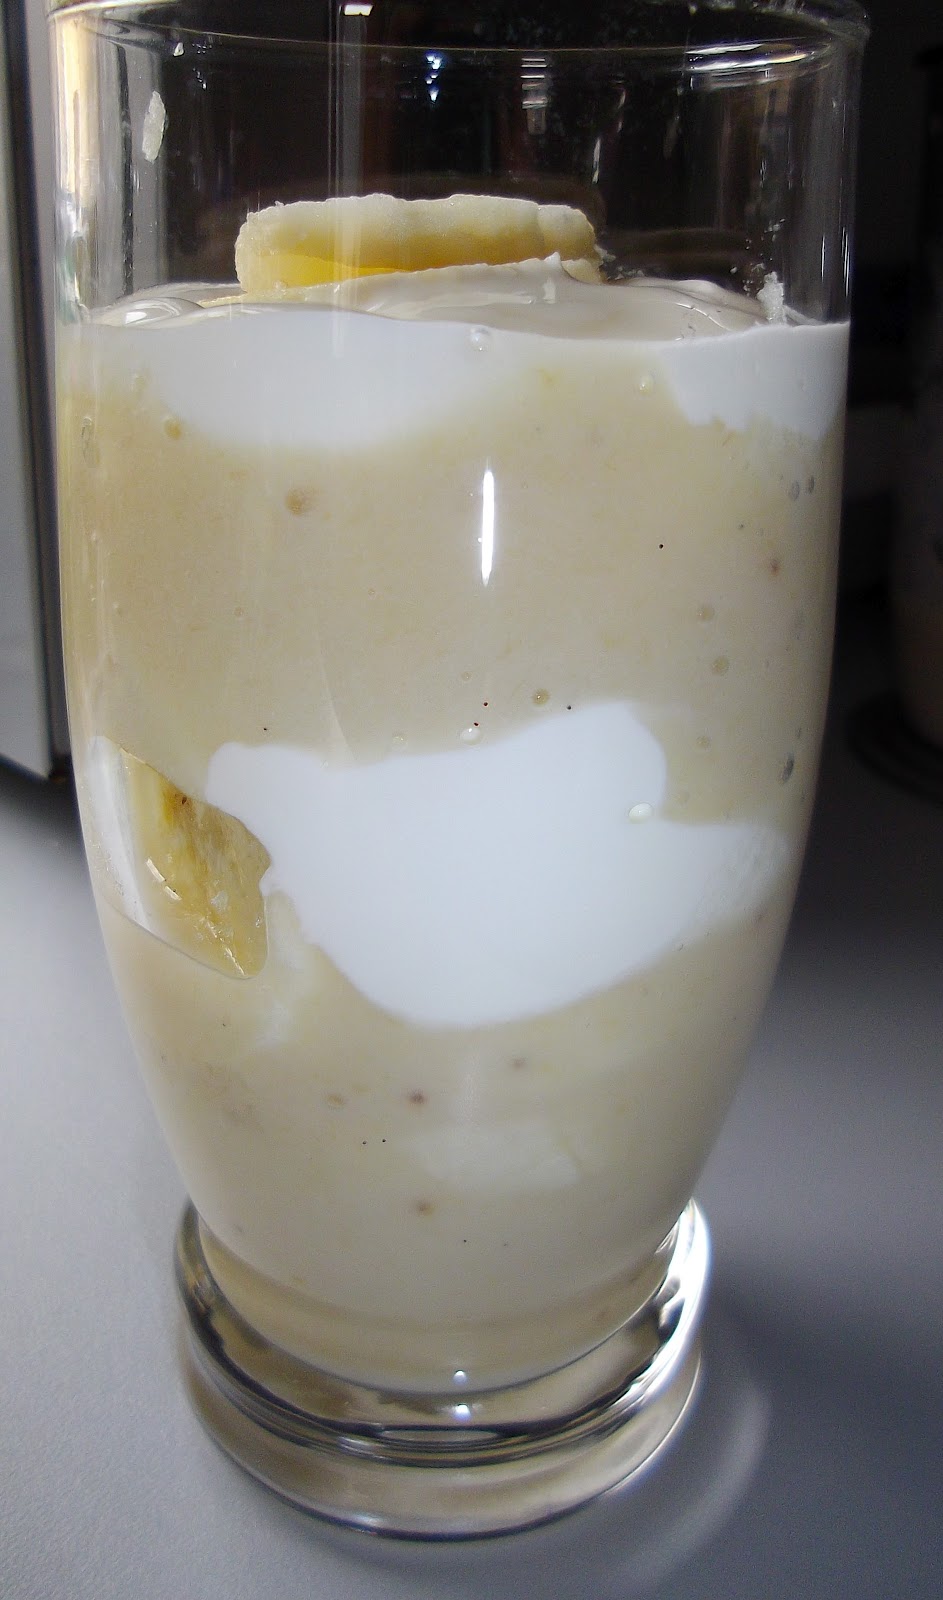 Banana mousse - recipe (including photos) | Life in Luxembourg